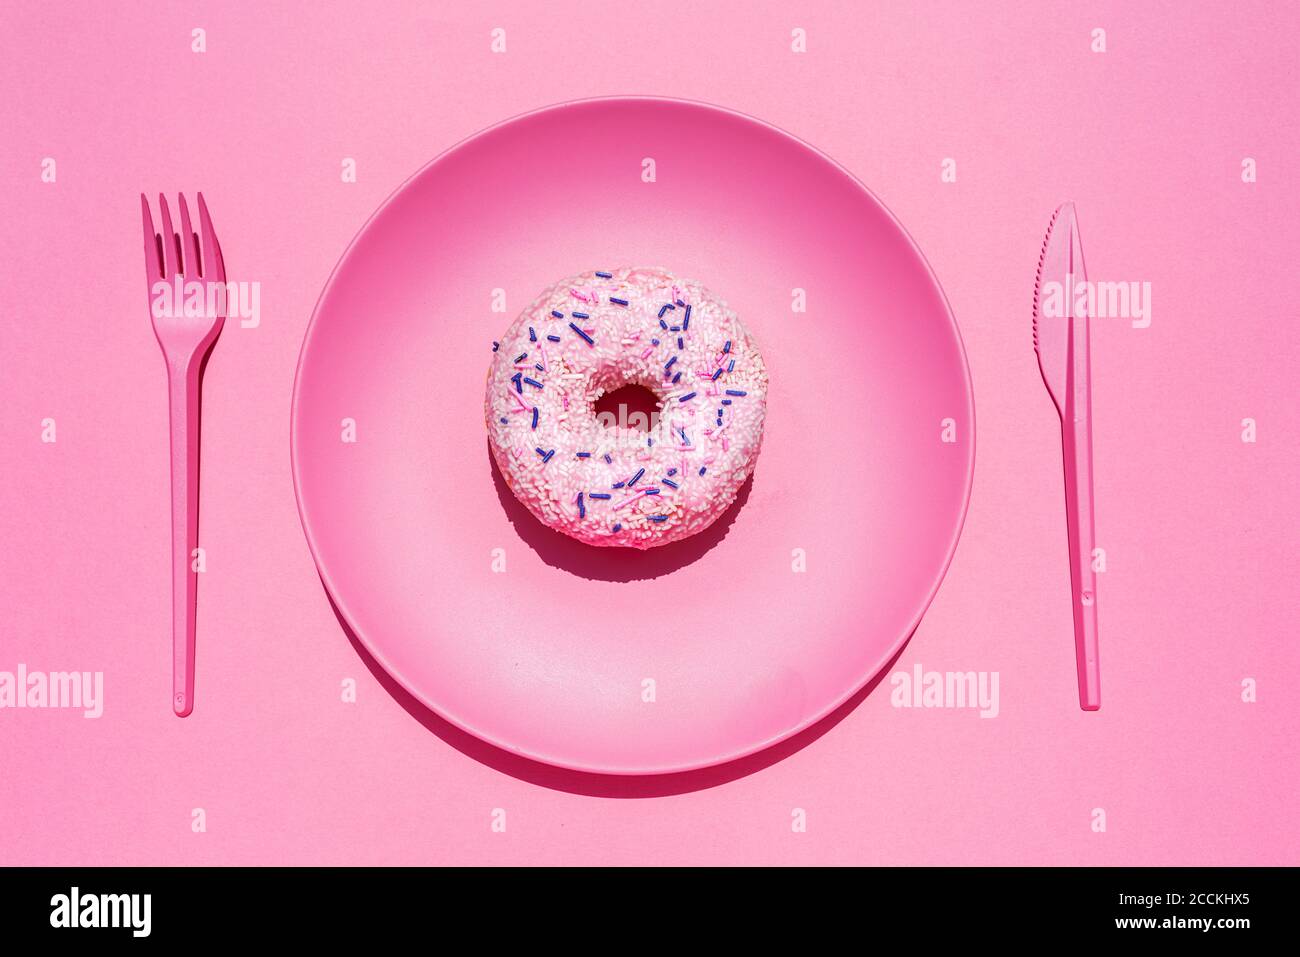 Studio shot of plastic cutlery and plate with sweet doughnut Stock Photo